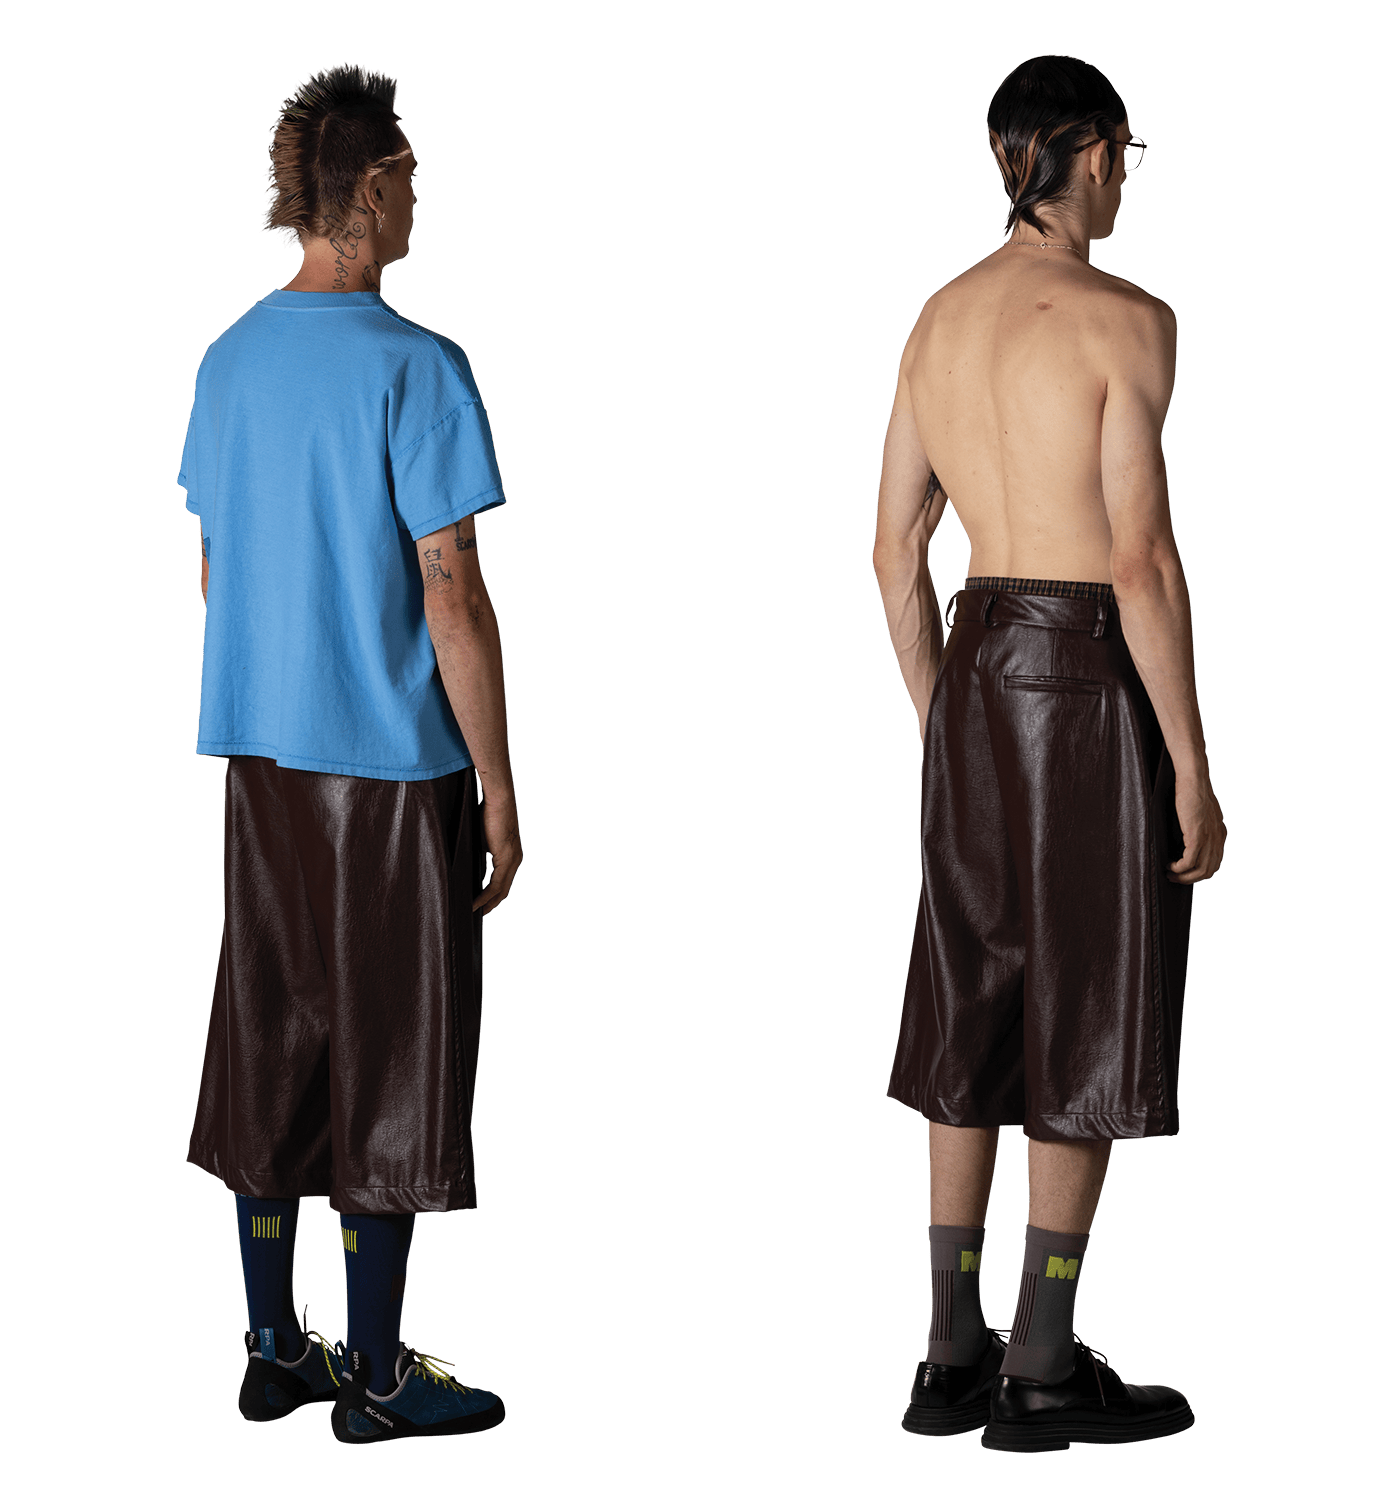 3/4 Rider Shorts "Faux leather" image 4